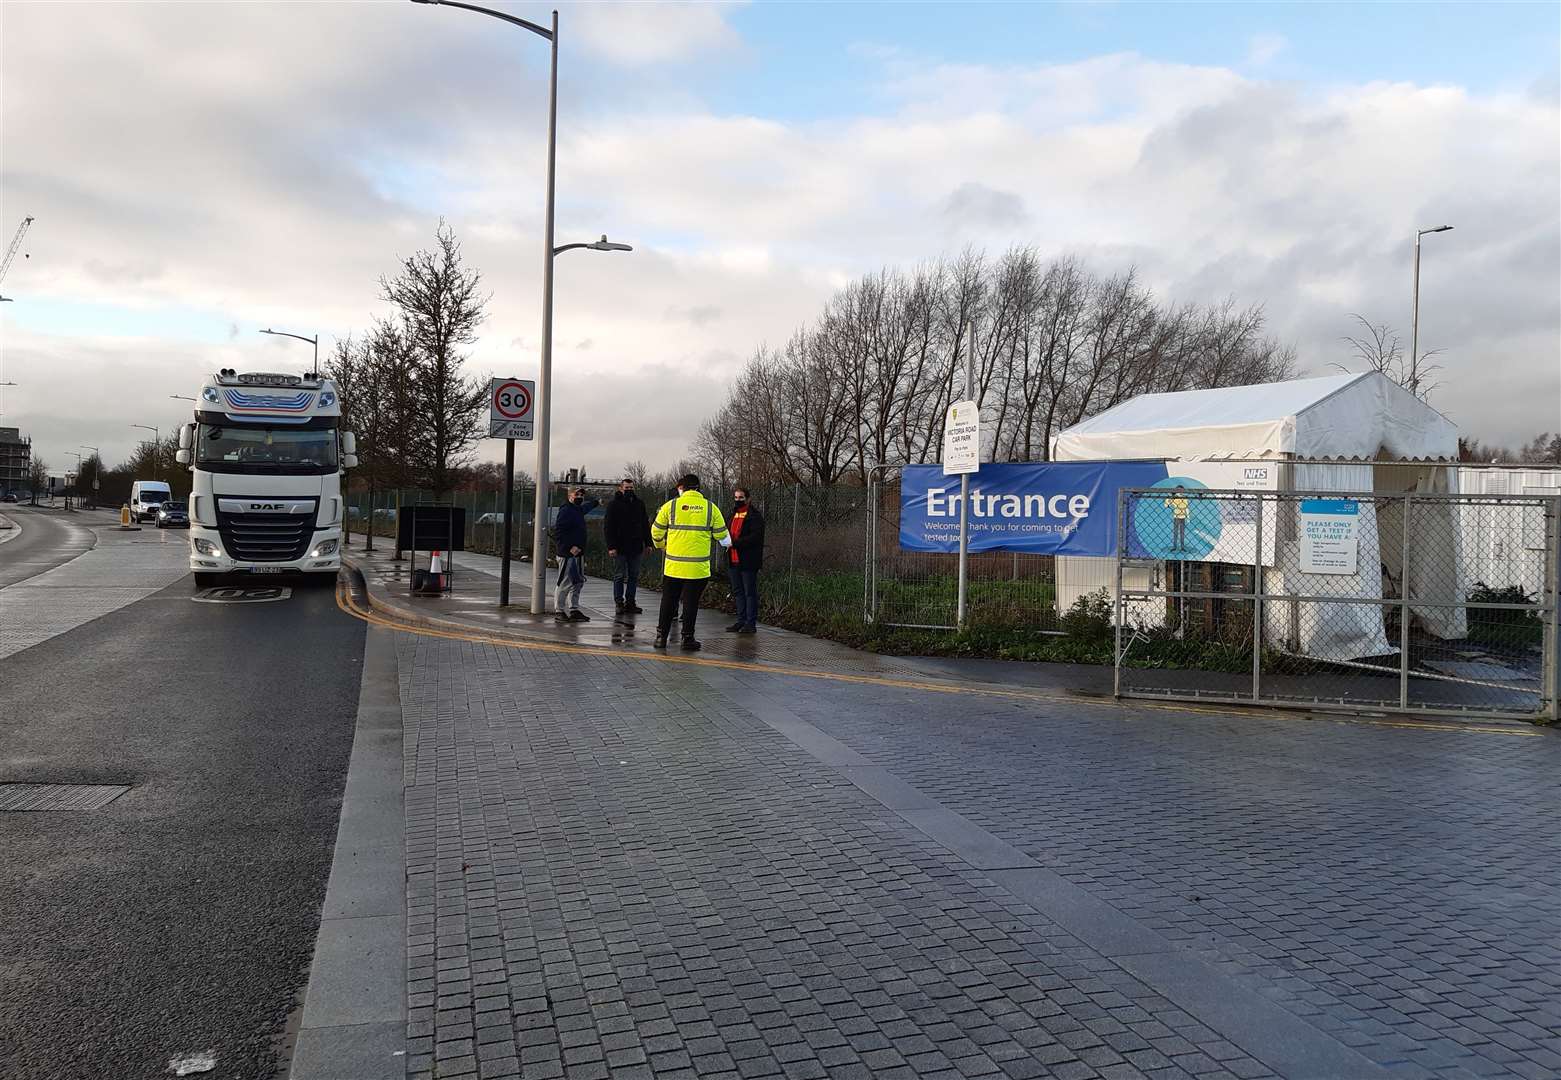 Lorry drivers have been waiting at the entrance to the site in Victoria Road